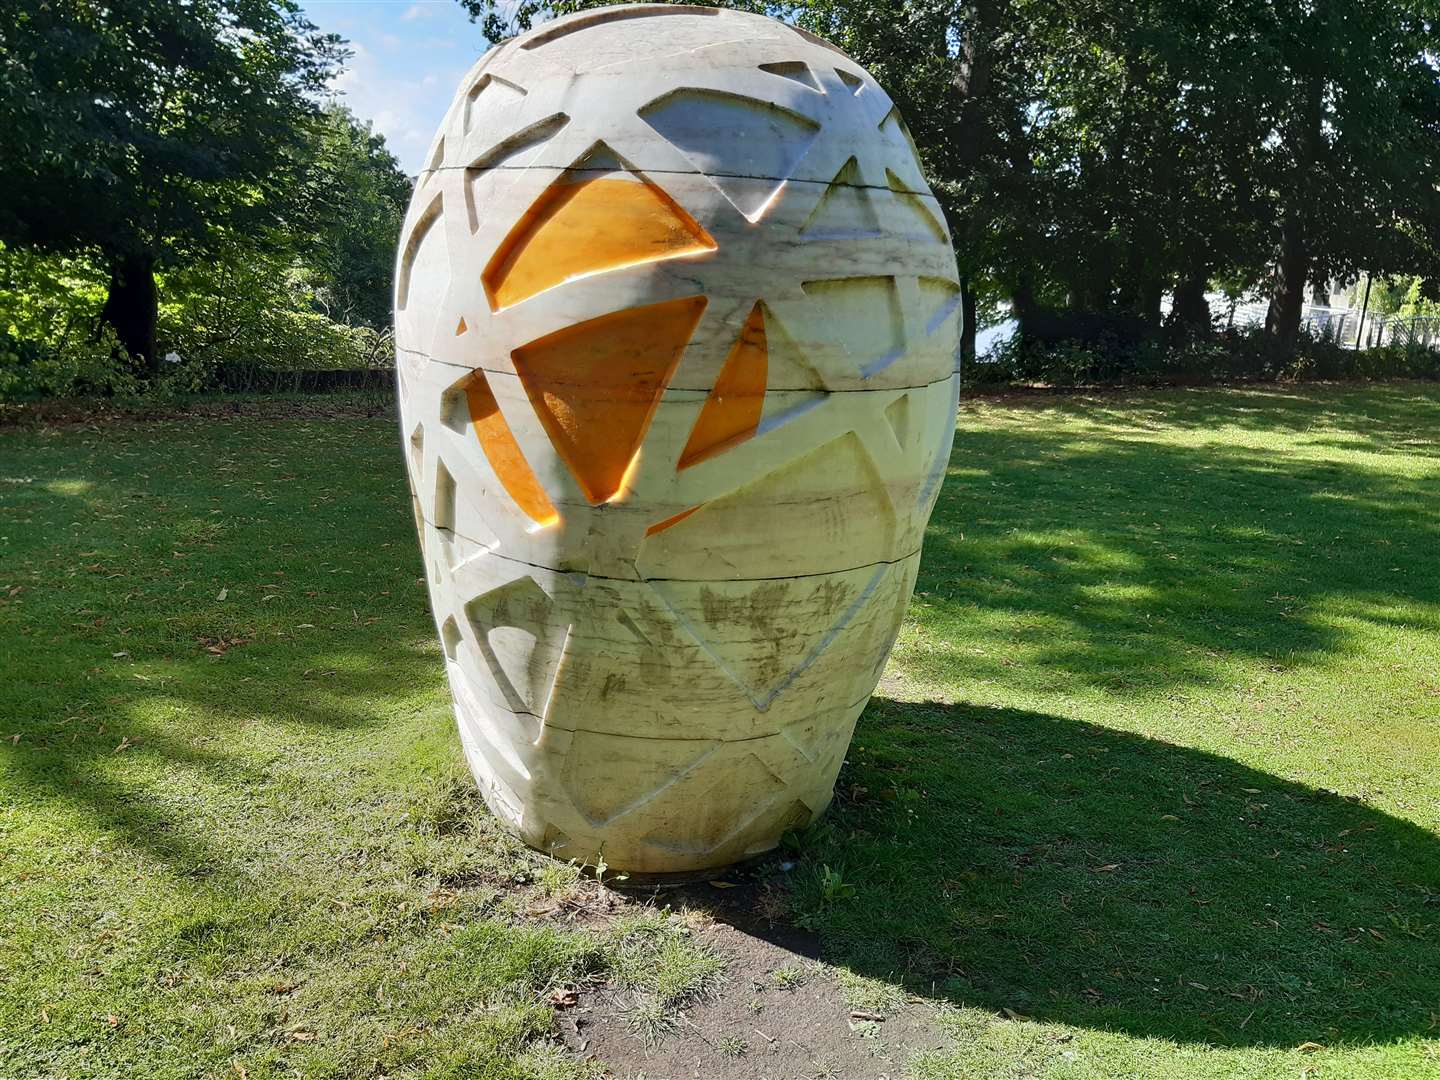 The Egg, in the Rose Garden near the Archbishops Palace, Maidstone